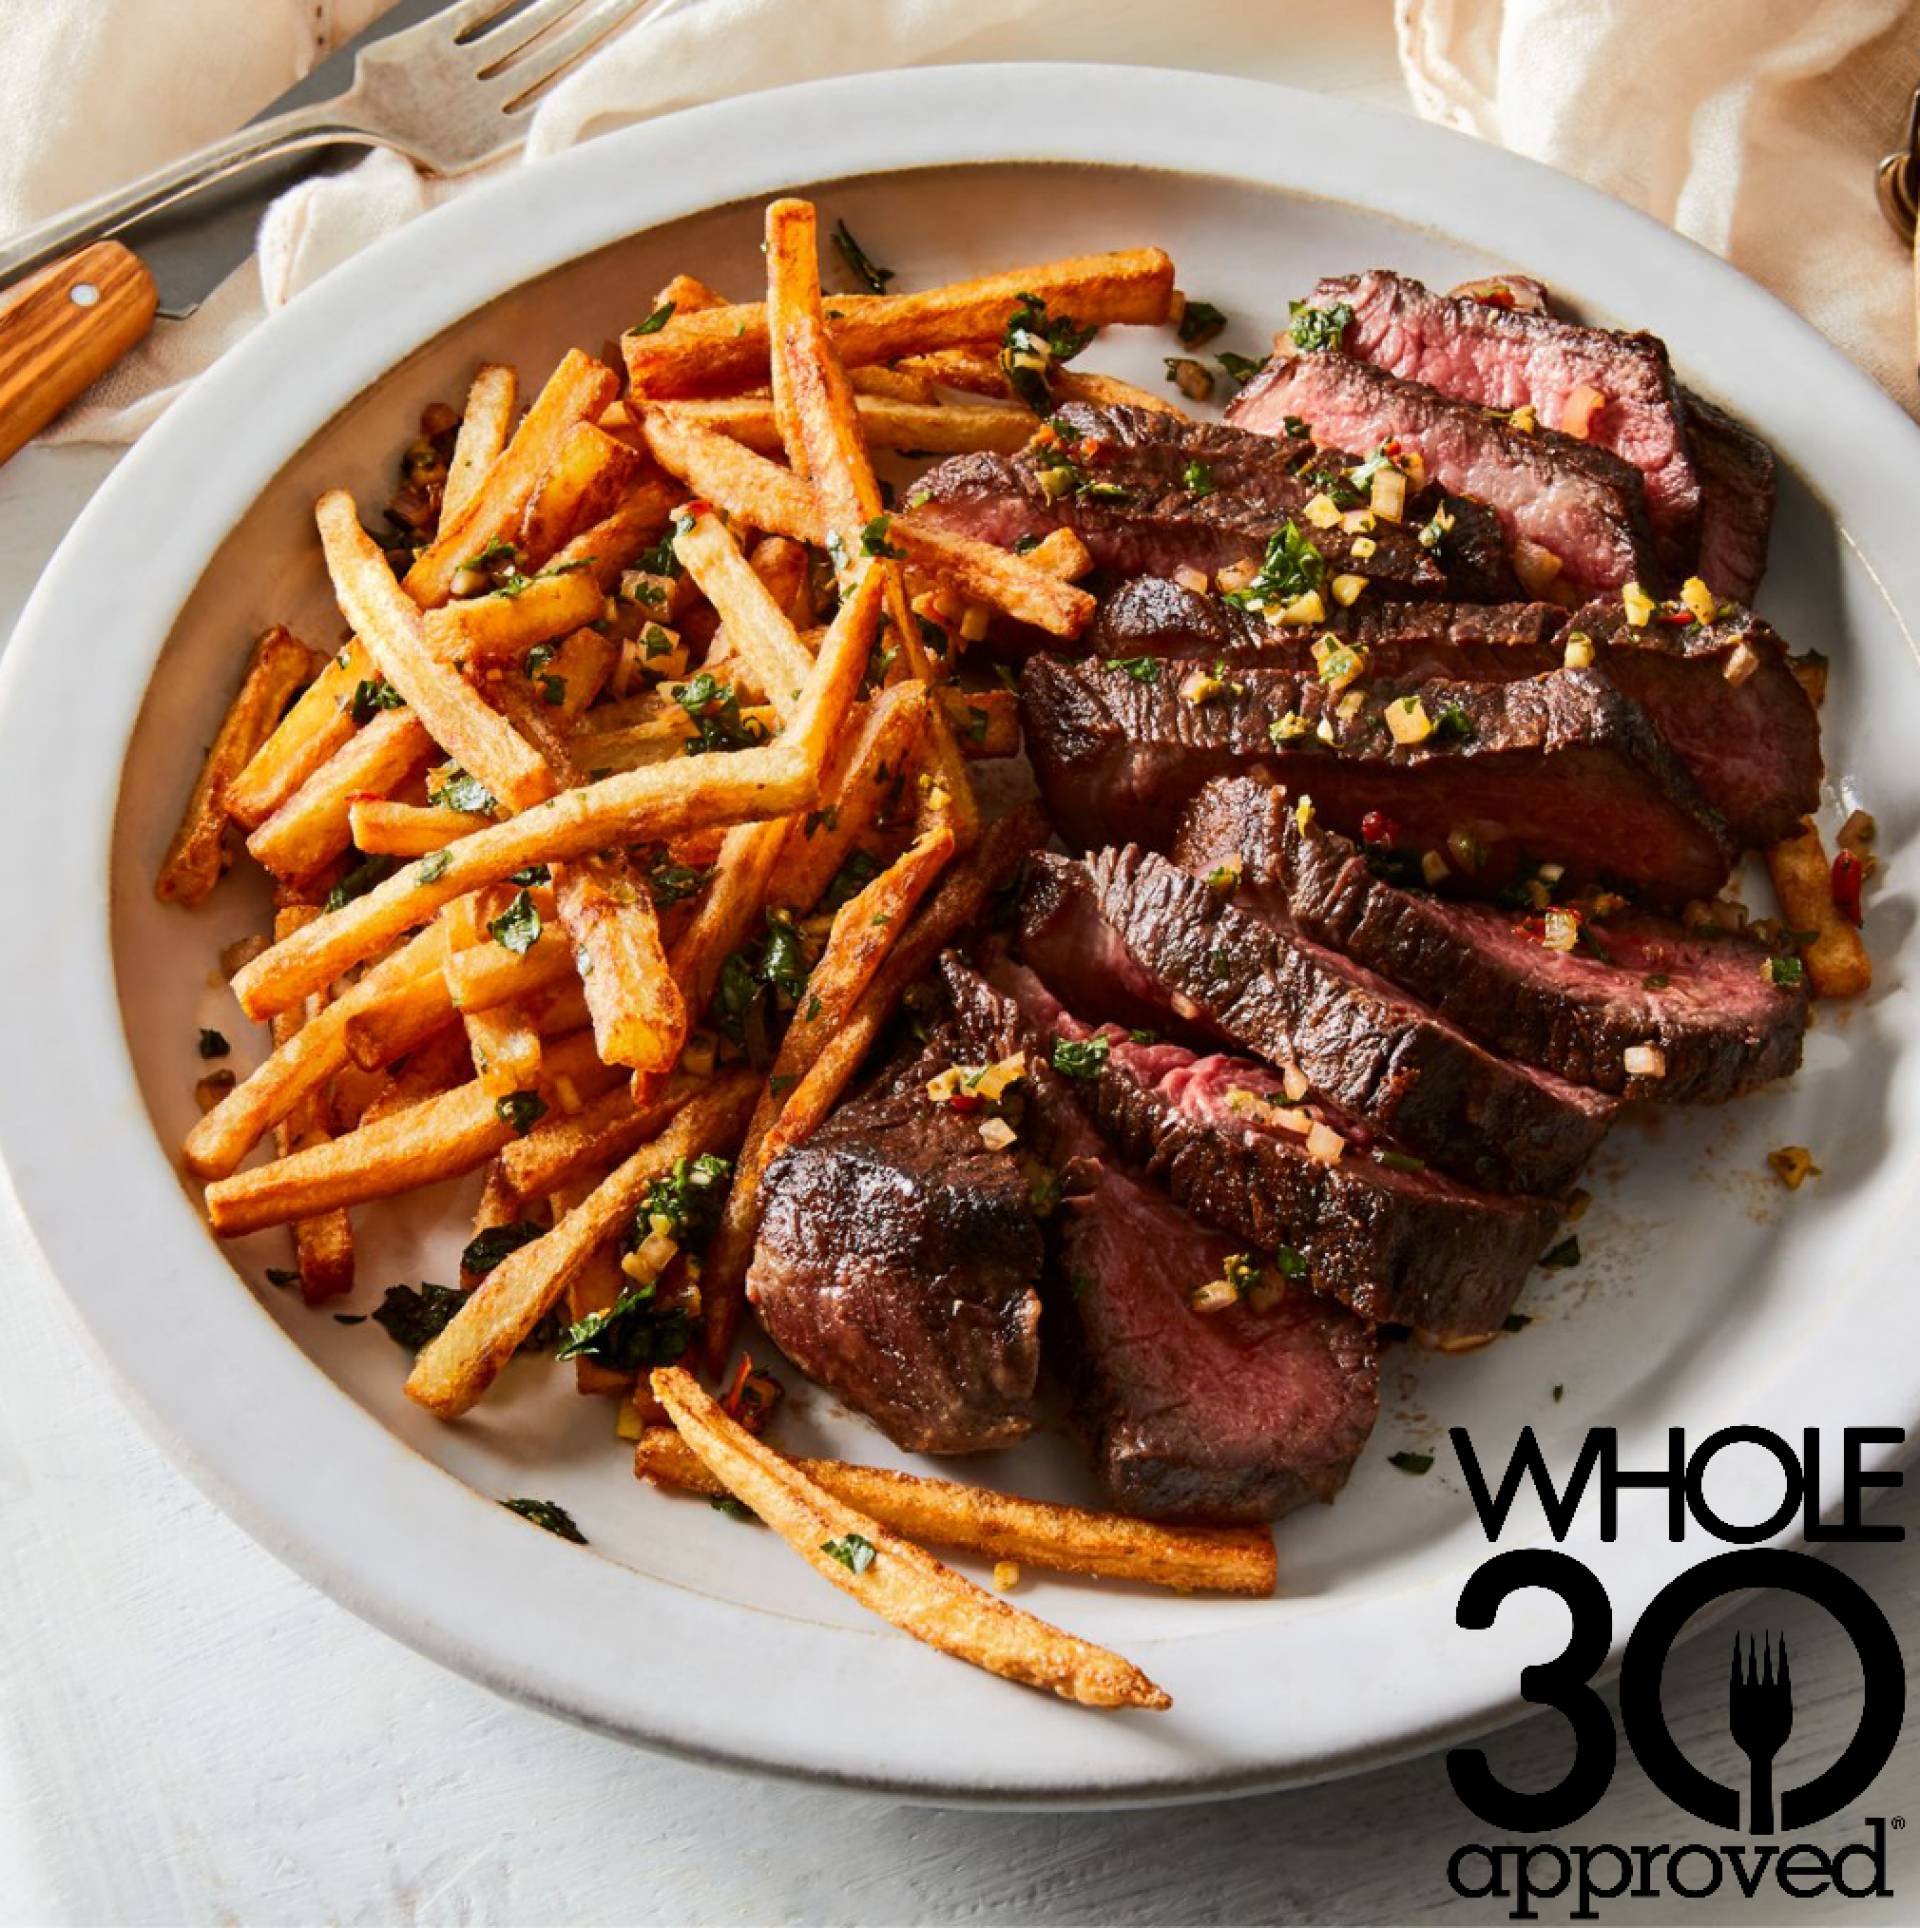 Whole30 Steak and Frites